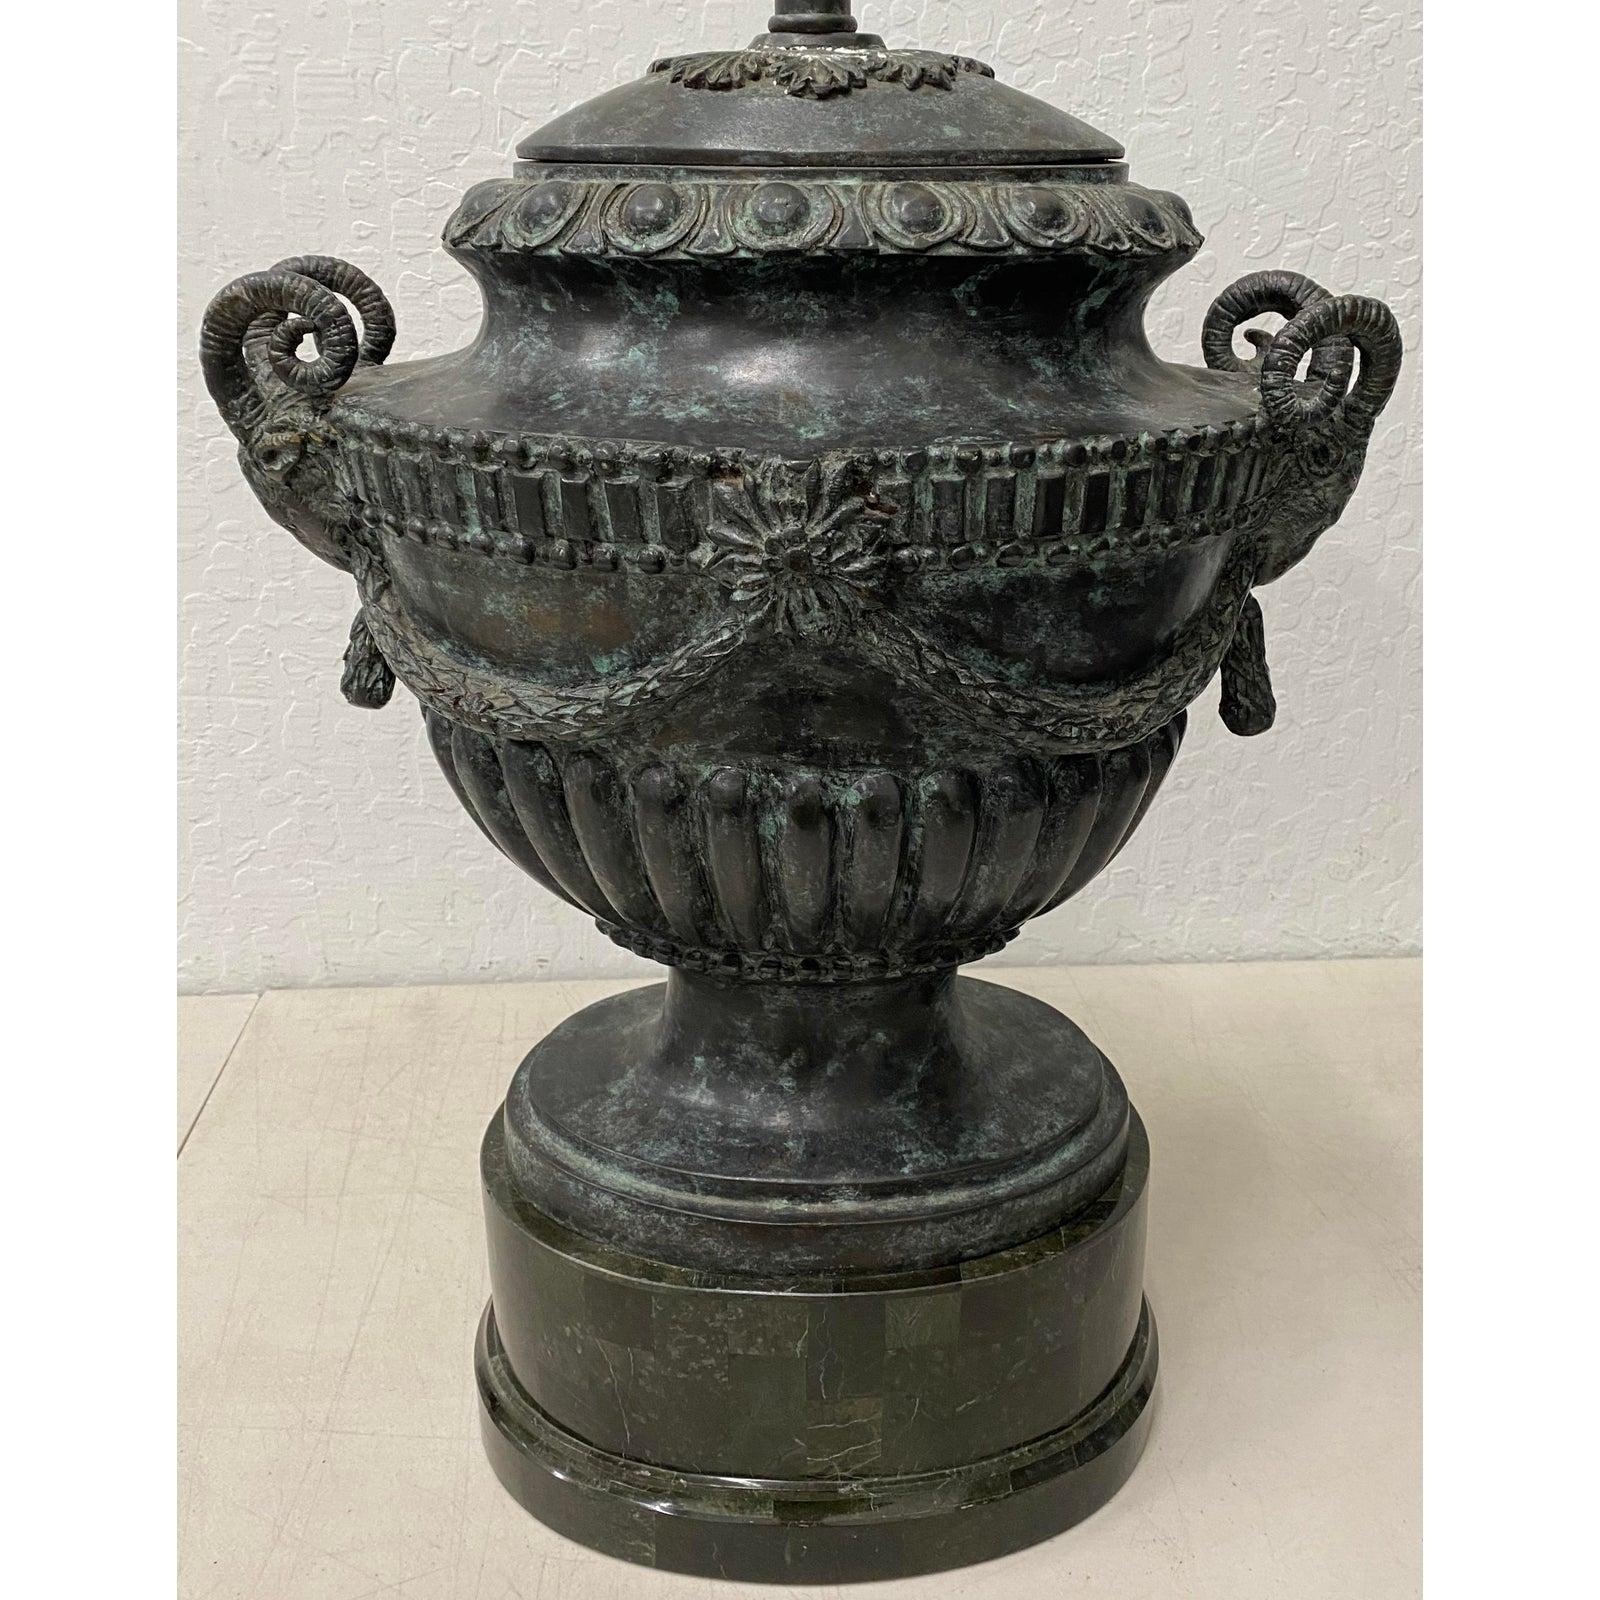 Patinated cast bronze urn table lamp by Maitland Smith, circa 1960

Elegant cast bronze urn lamp with rams heads.

Measures: 11.75